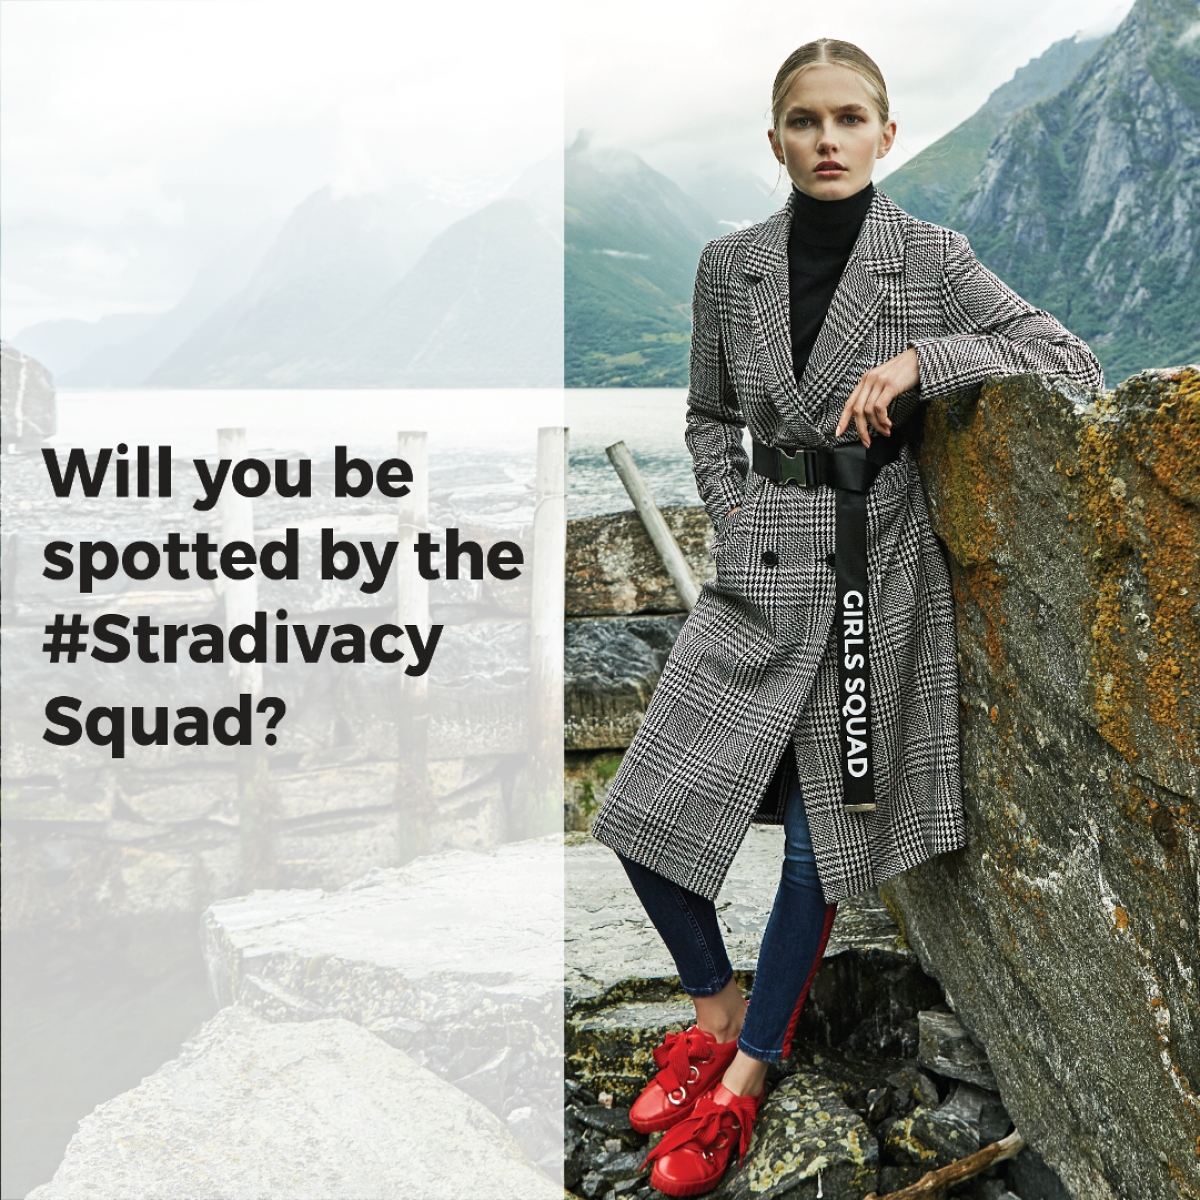 Will you be spotted by the Stradivarius squad?